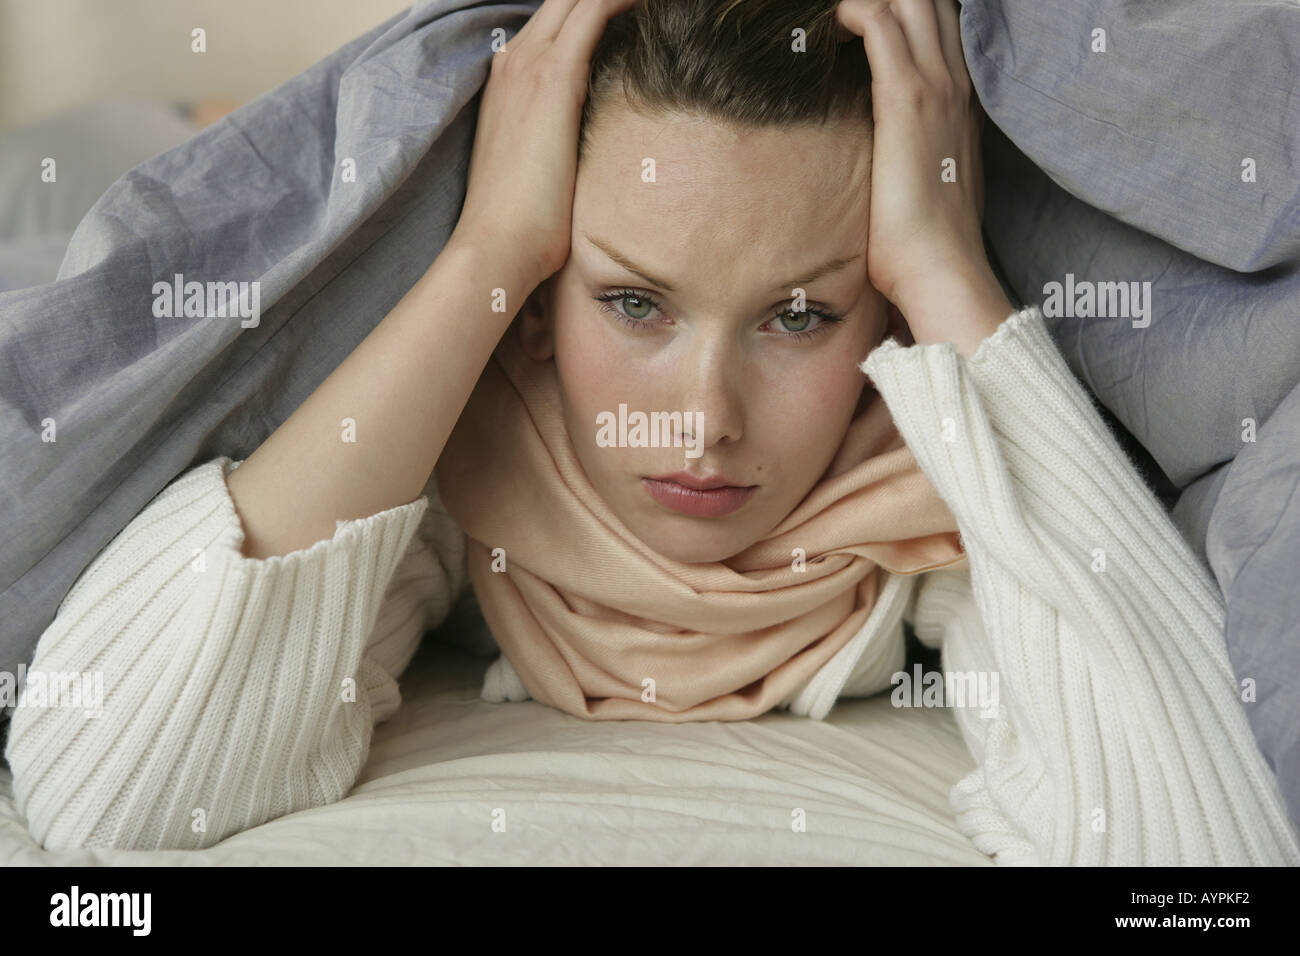 A young woman hiding herself under a blanket Stock Photo